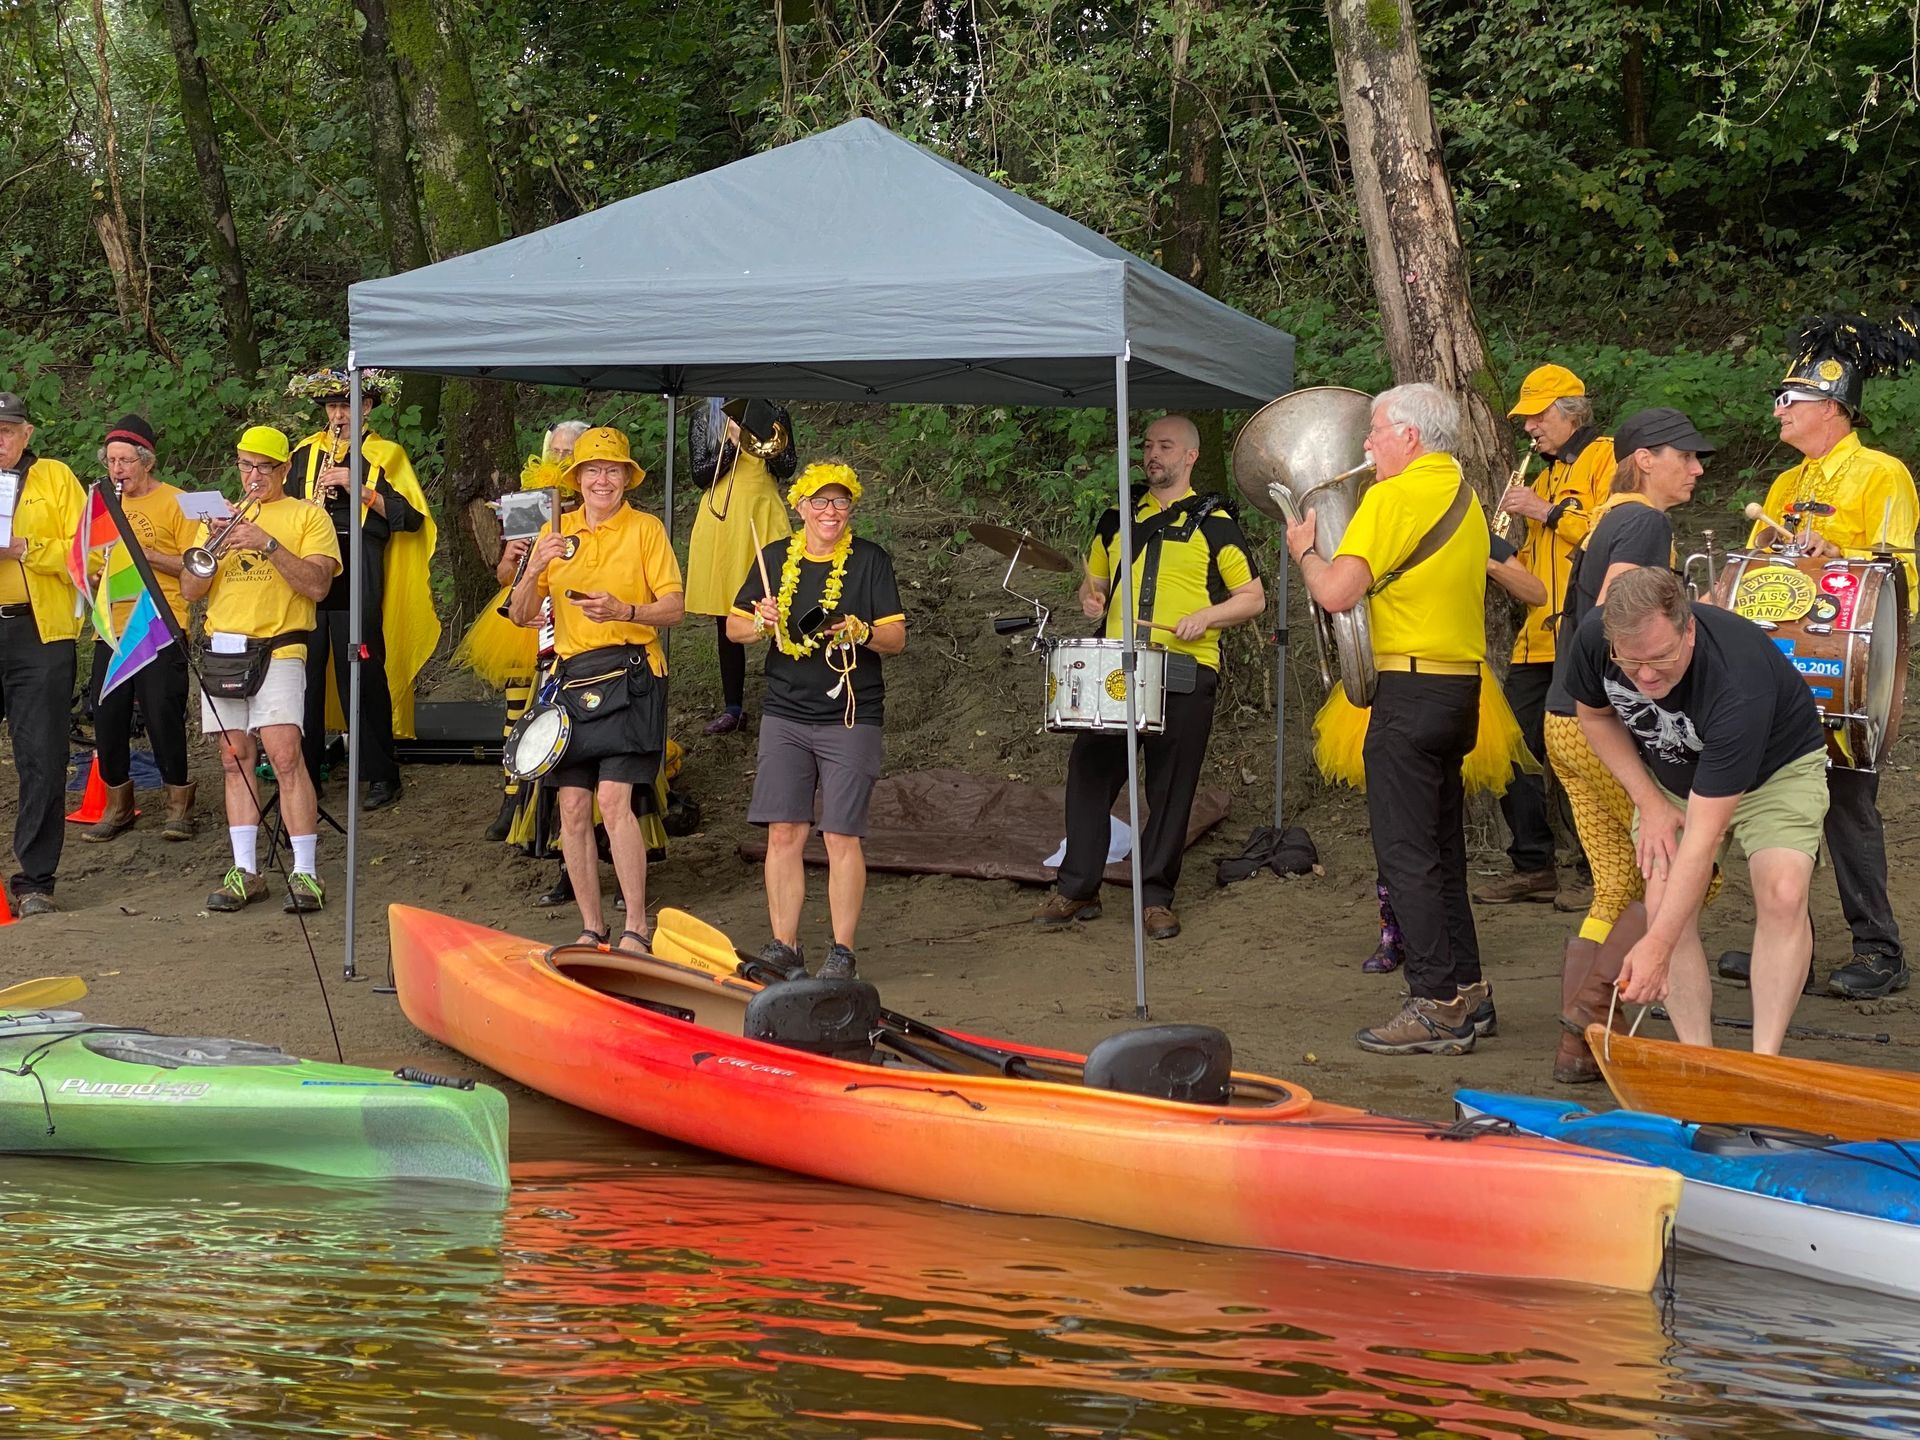 Image shows a band dressed in yellow and black, playing on the riverbank; kayaks are in front of them